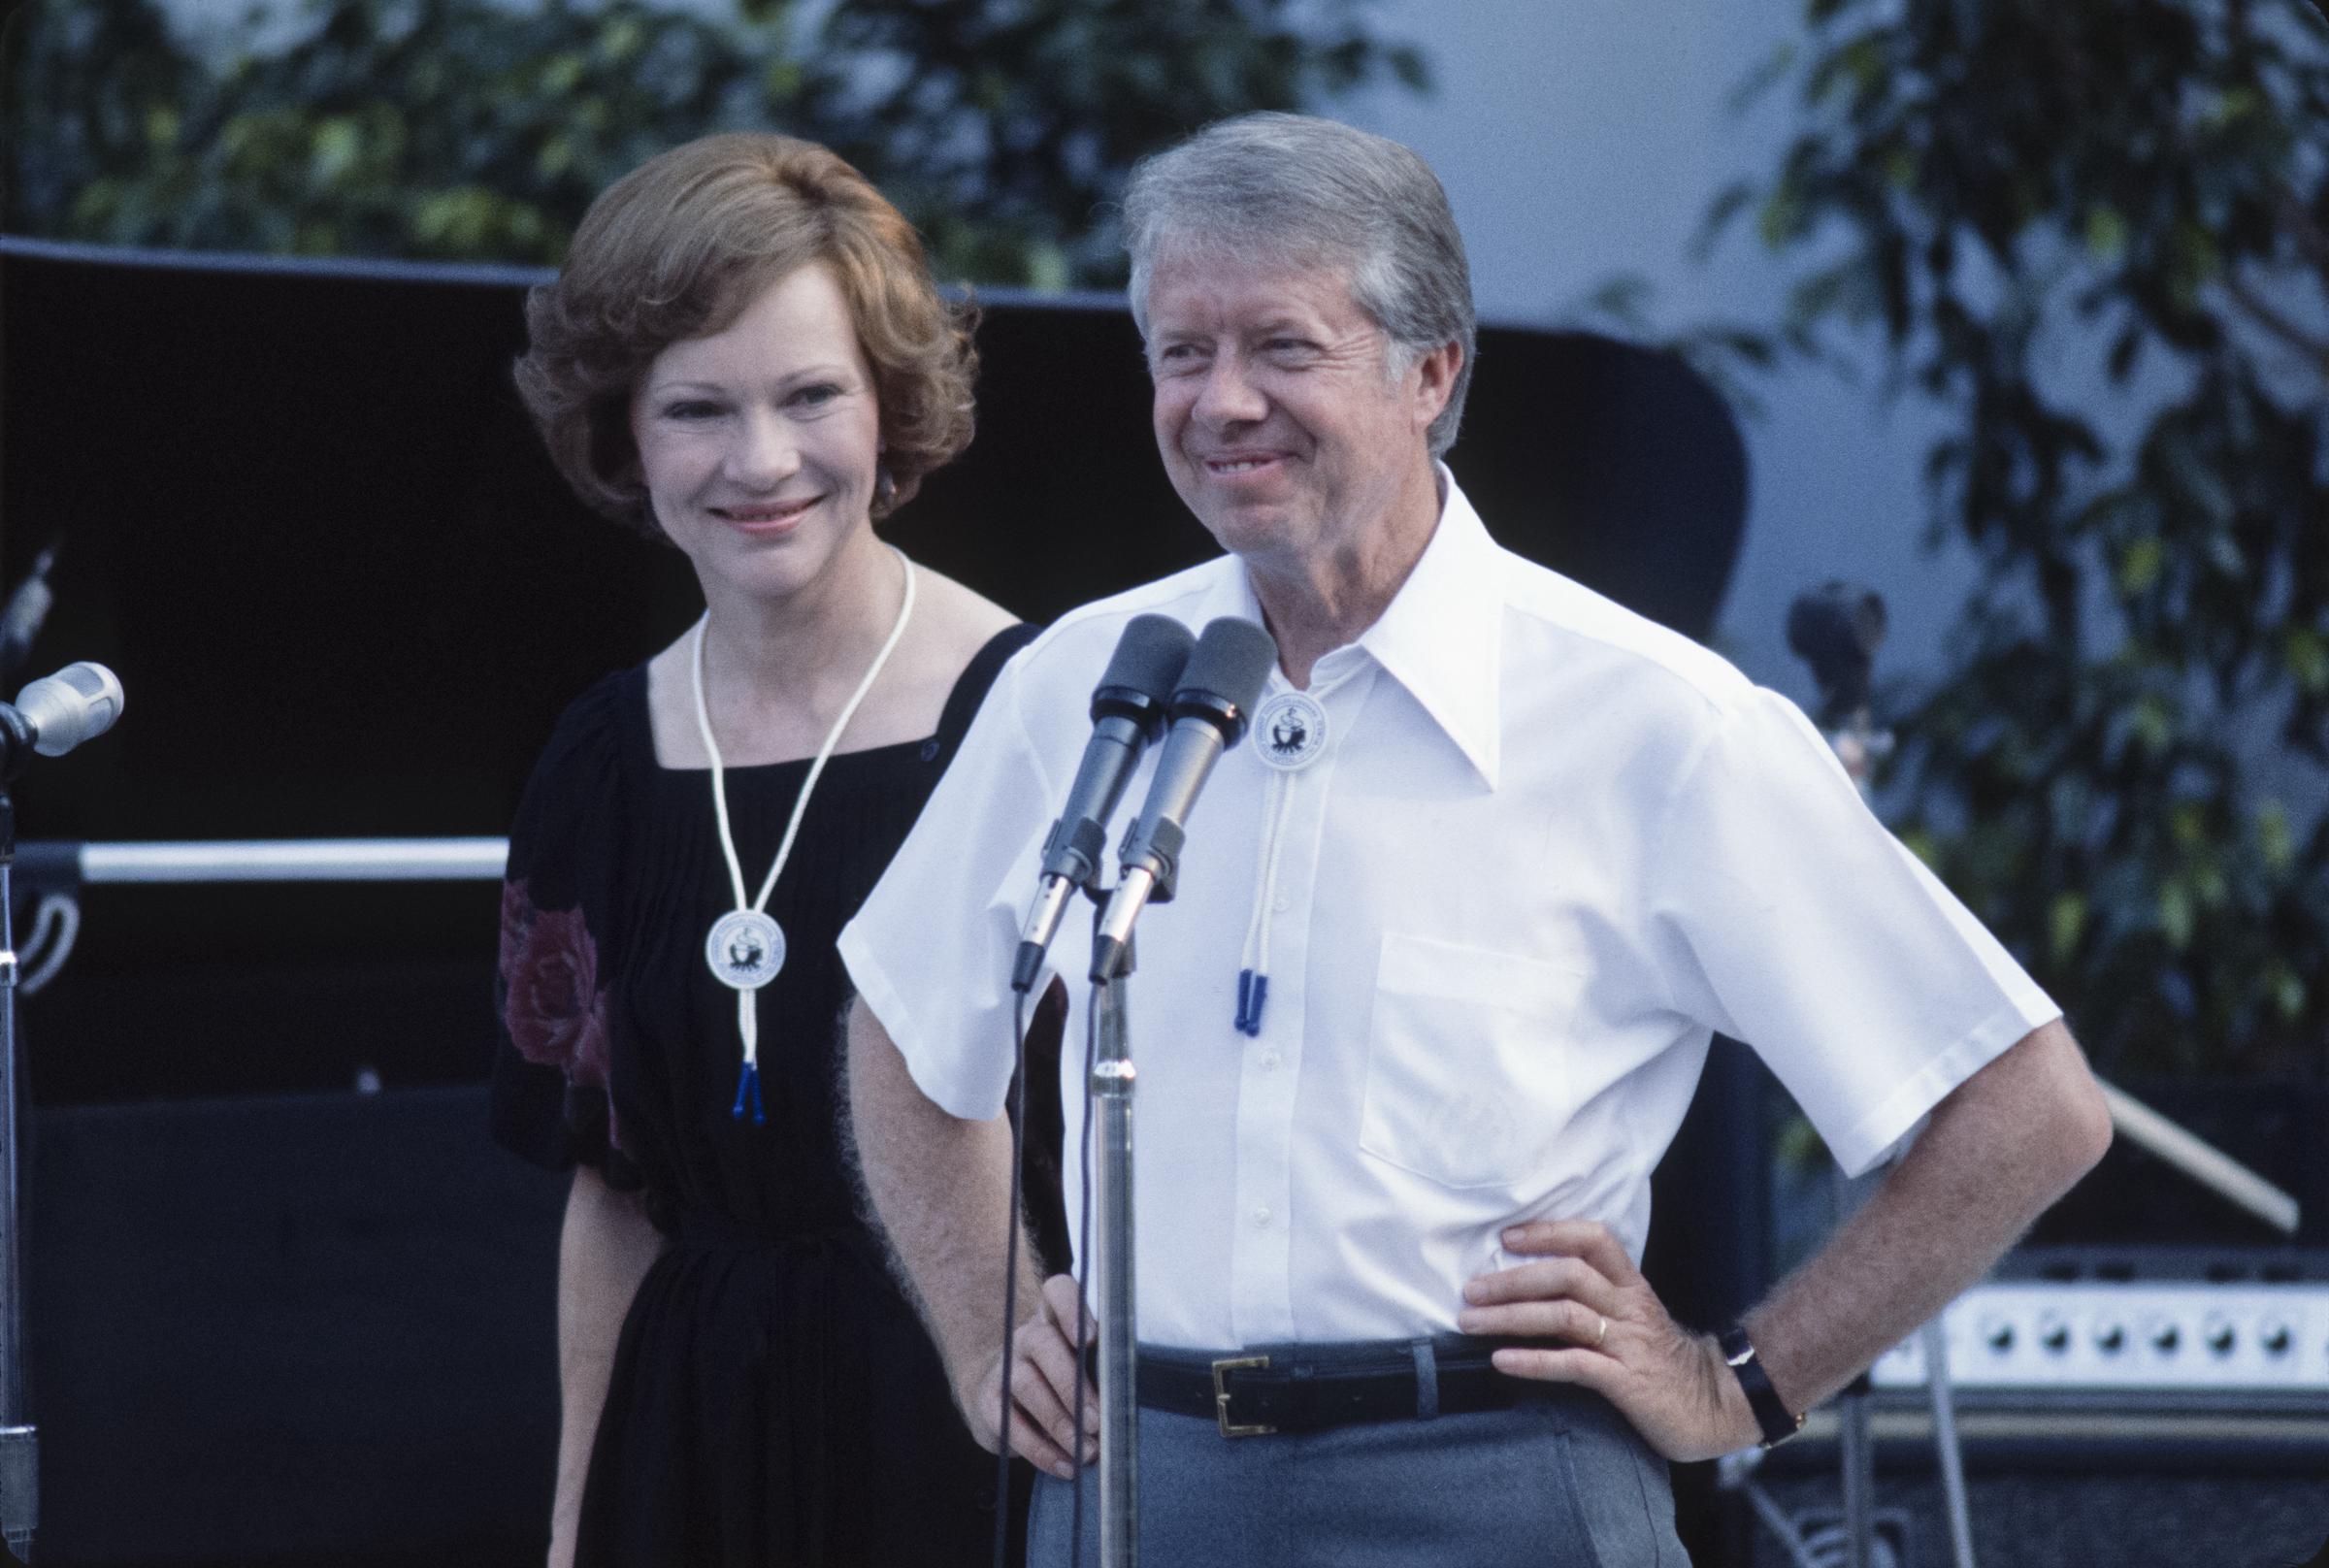 President Jimmy Carter, with First Lady Rosalynn behind, addresses the crowd from the stage at a White House Jazz Concert in June 1978. | Source :Getty Images